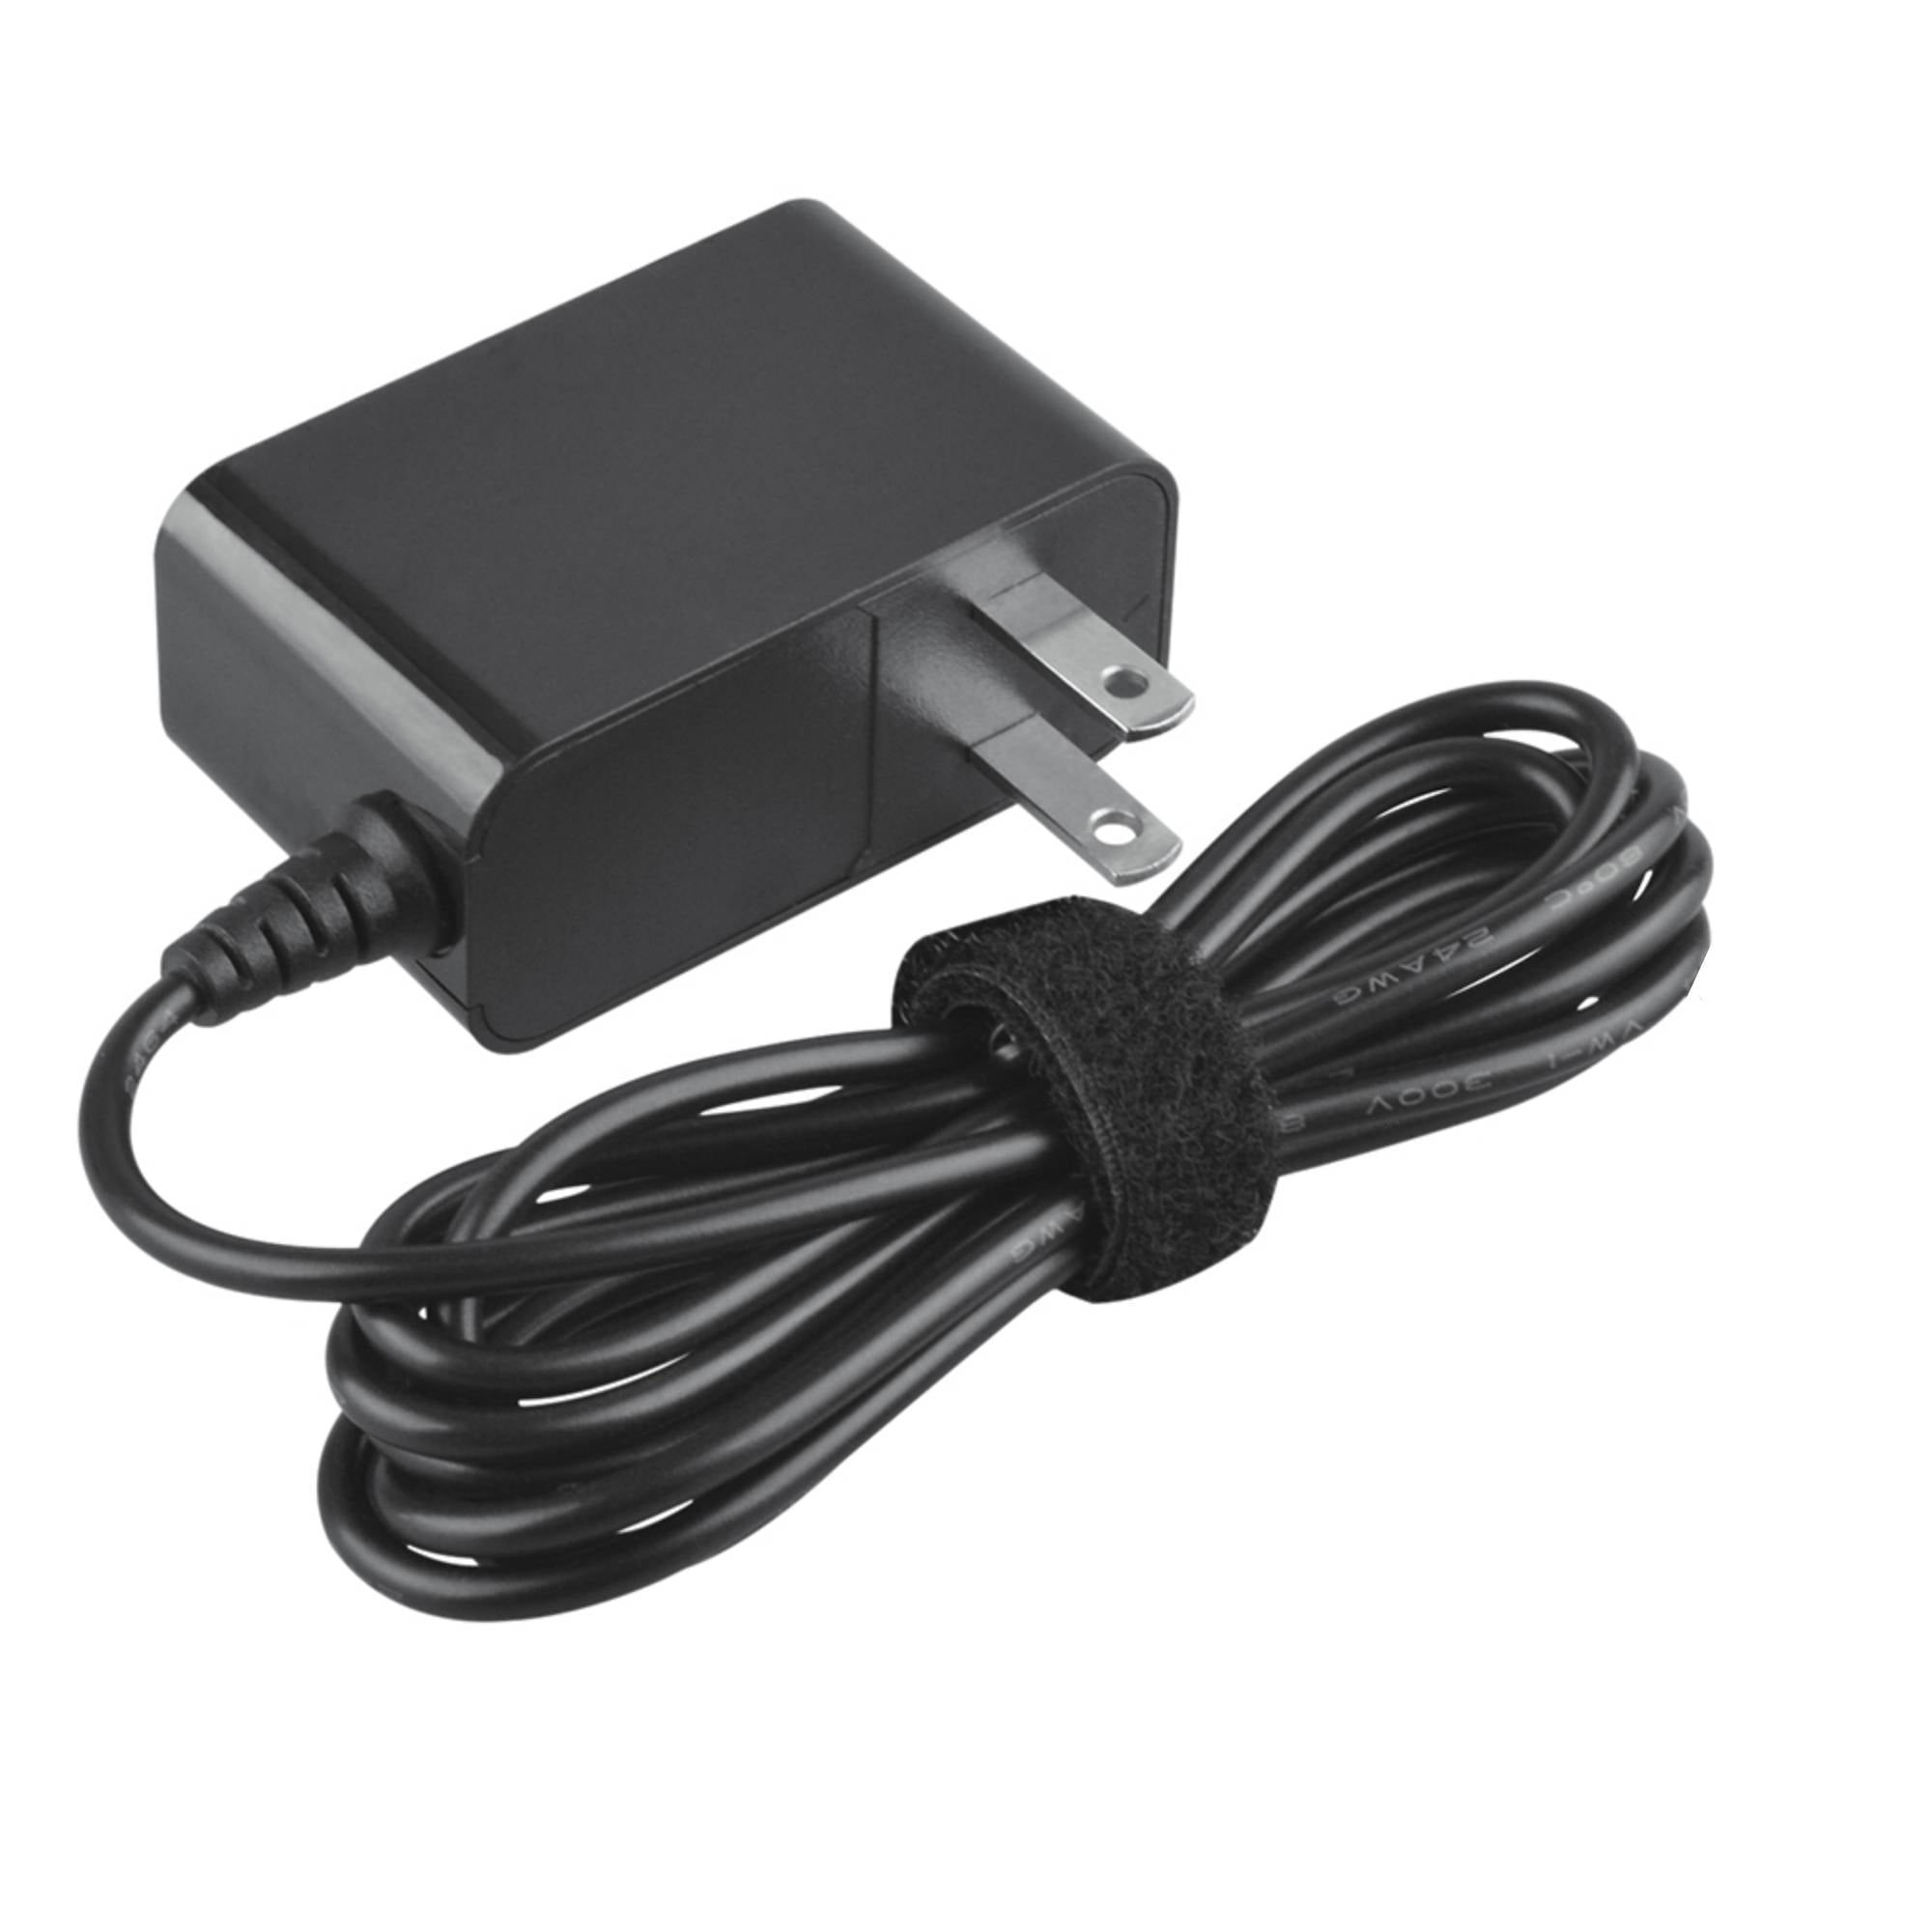 Omilik AC Adapter compatible with Nokia AC-3A AC-3E AC-3X AC-4E AC-4X AC-5A AC-5E Power Cable - Walmart.com